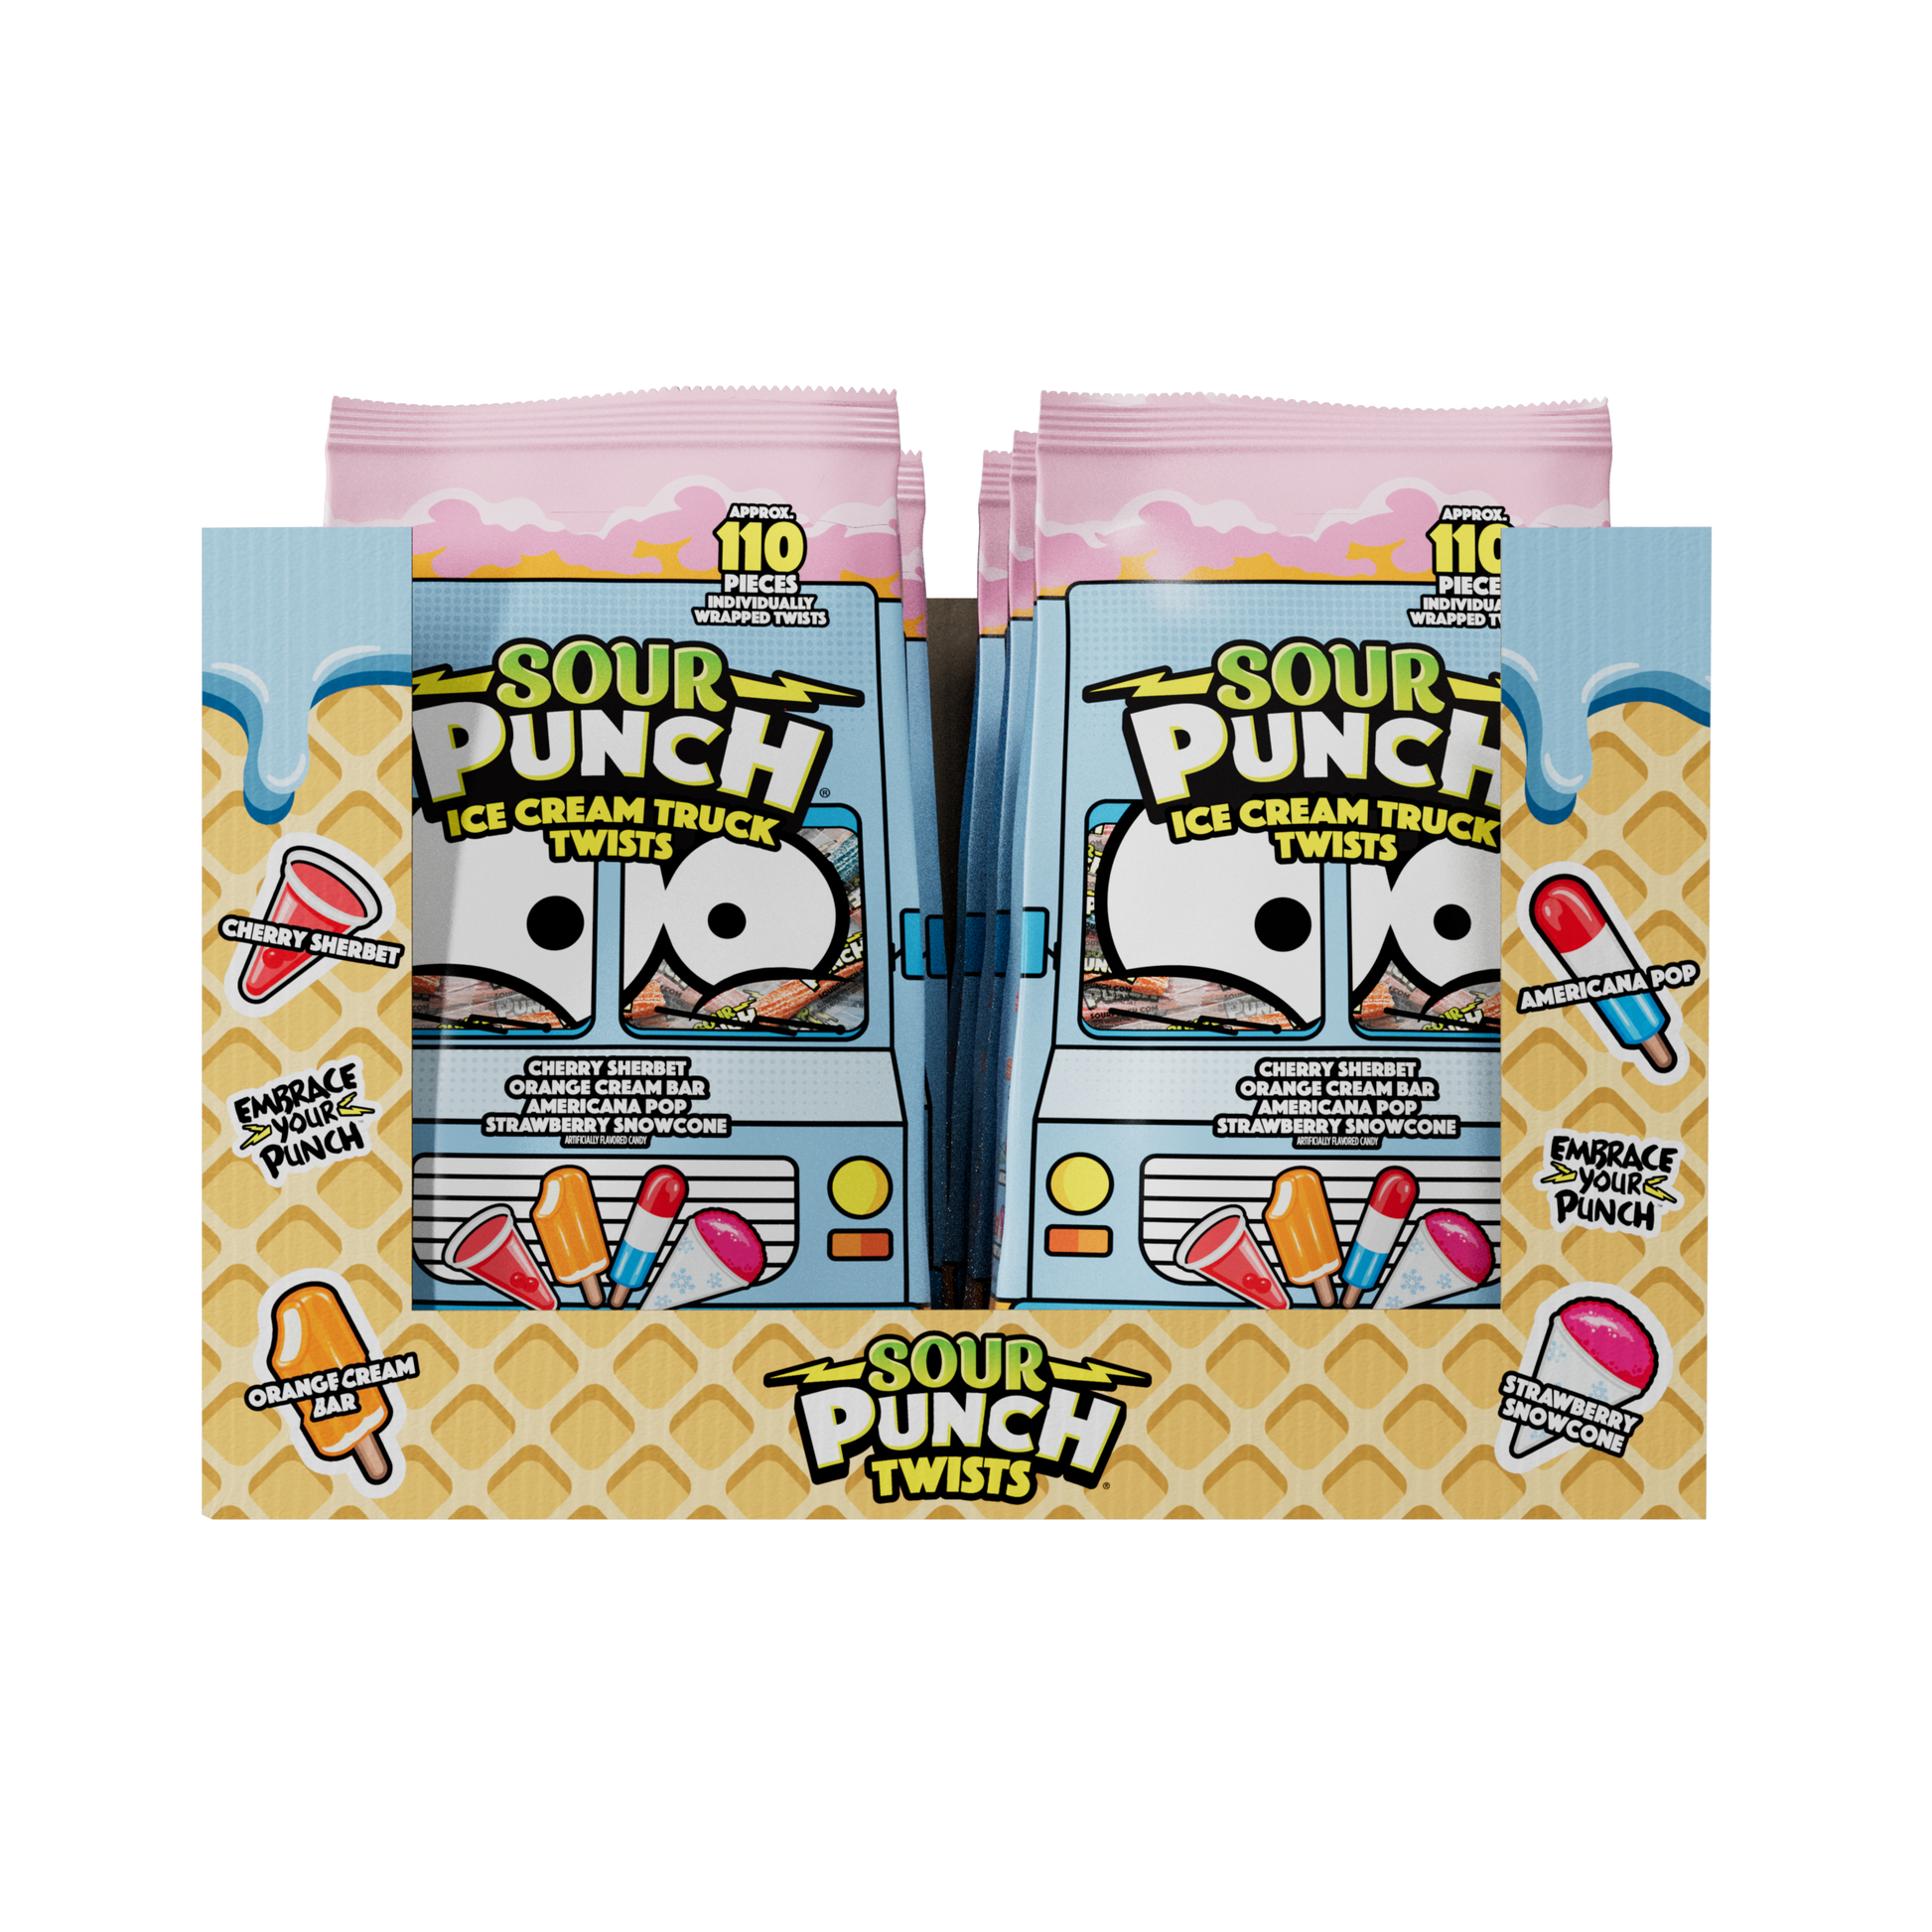 6-Pack of SOUR PUNCH Ice Cream Truck Twists Candy 24.5oz bags